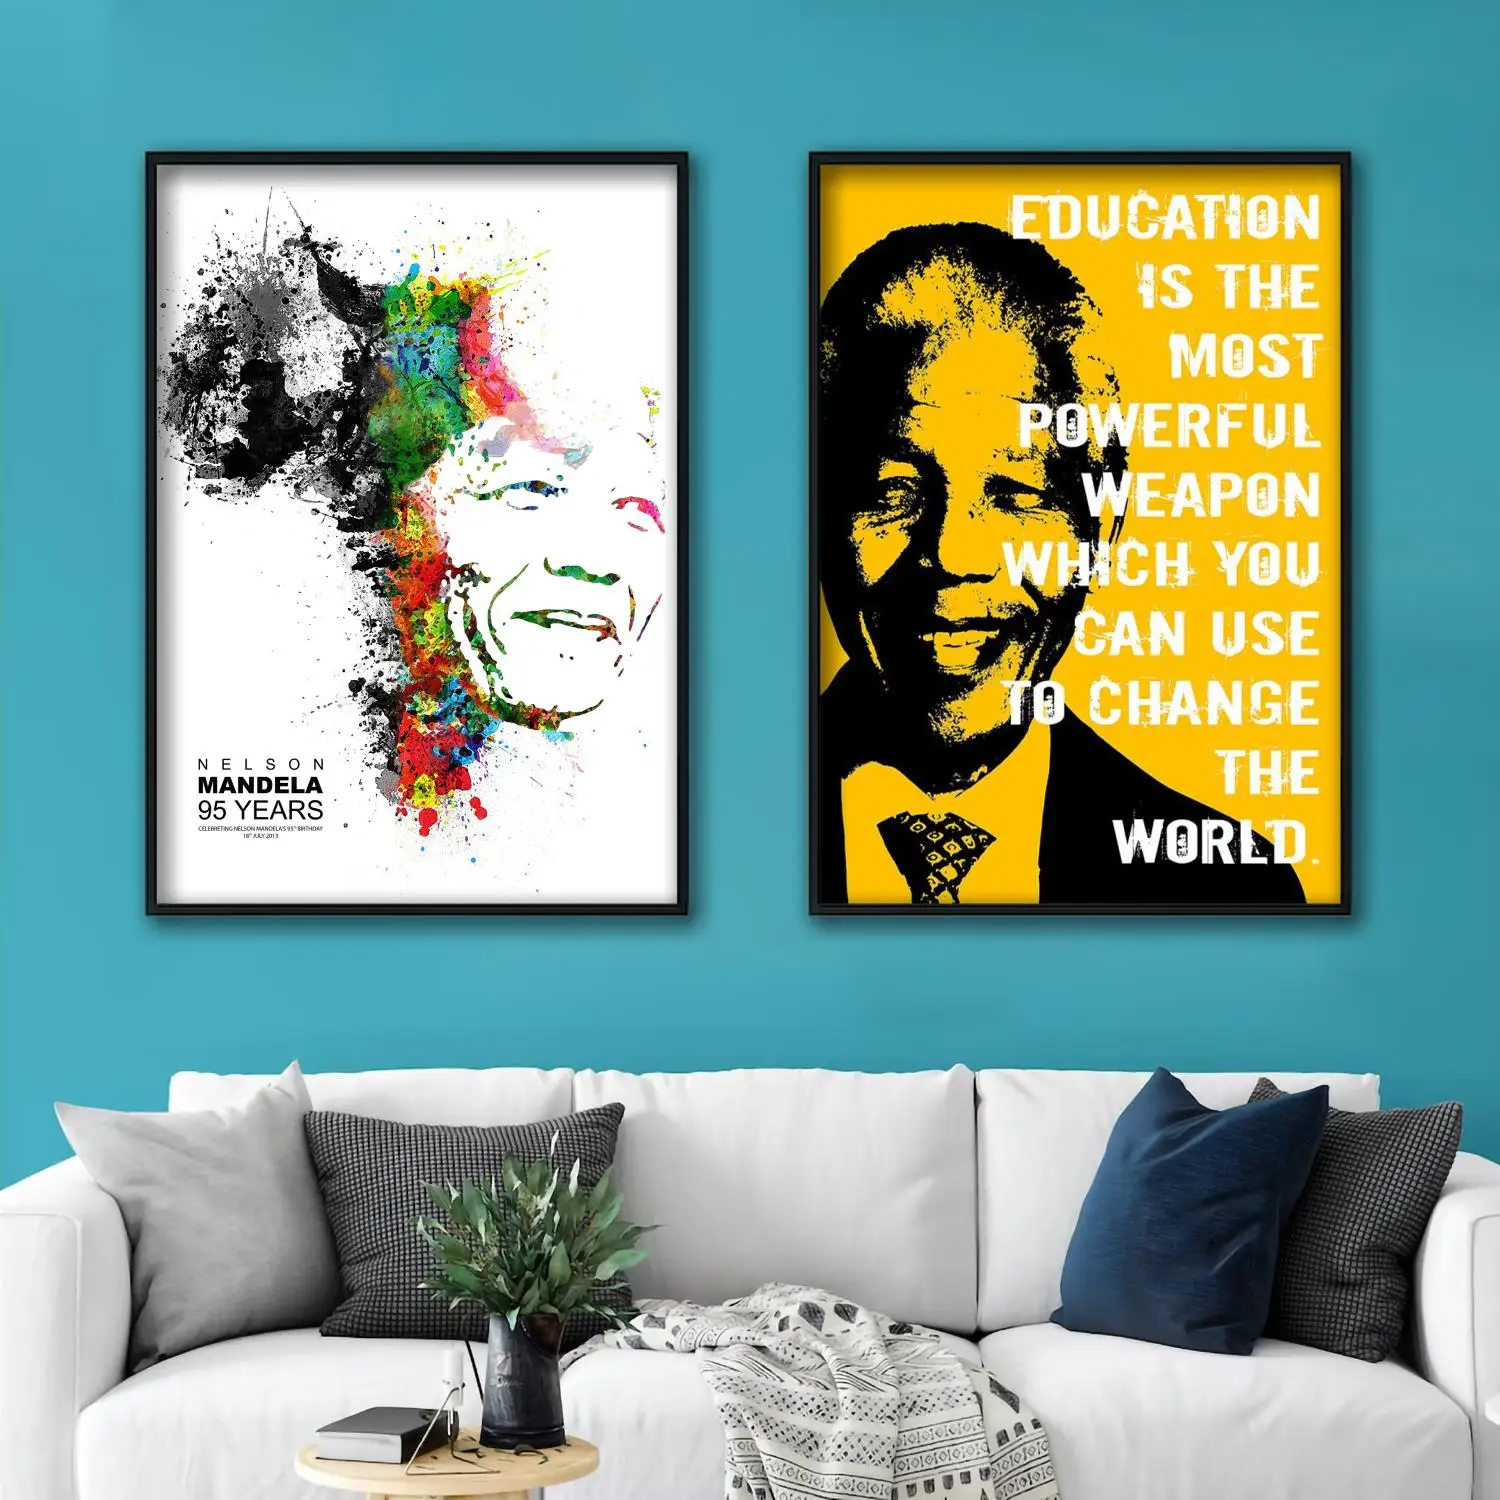 

nelson mandela President Decorative Canvas Posters Room Bar Cafe Decor Gift Print Art Wall Paintings